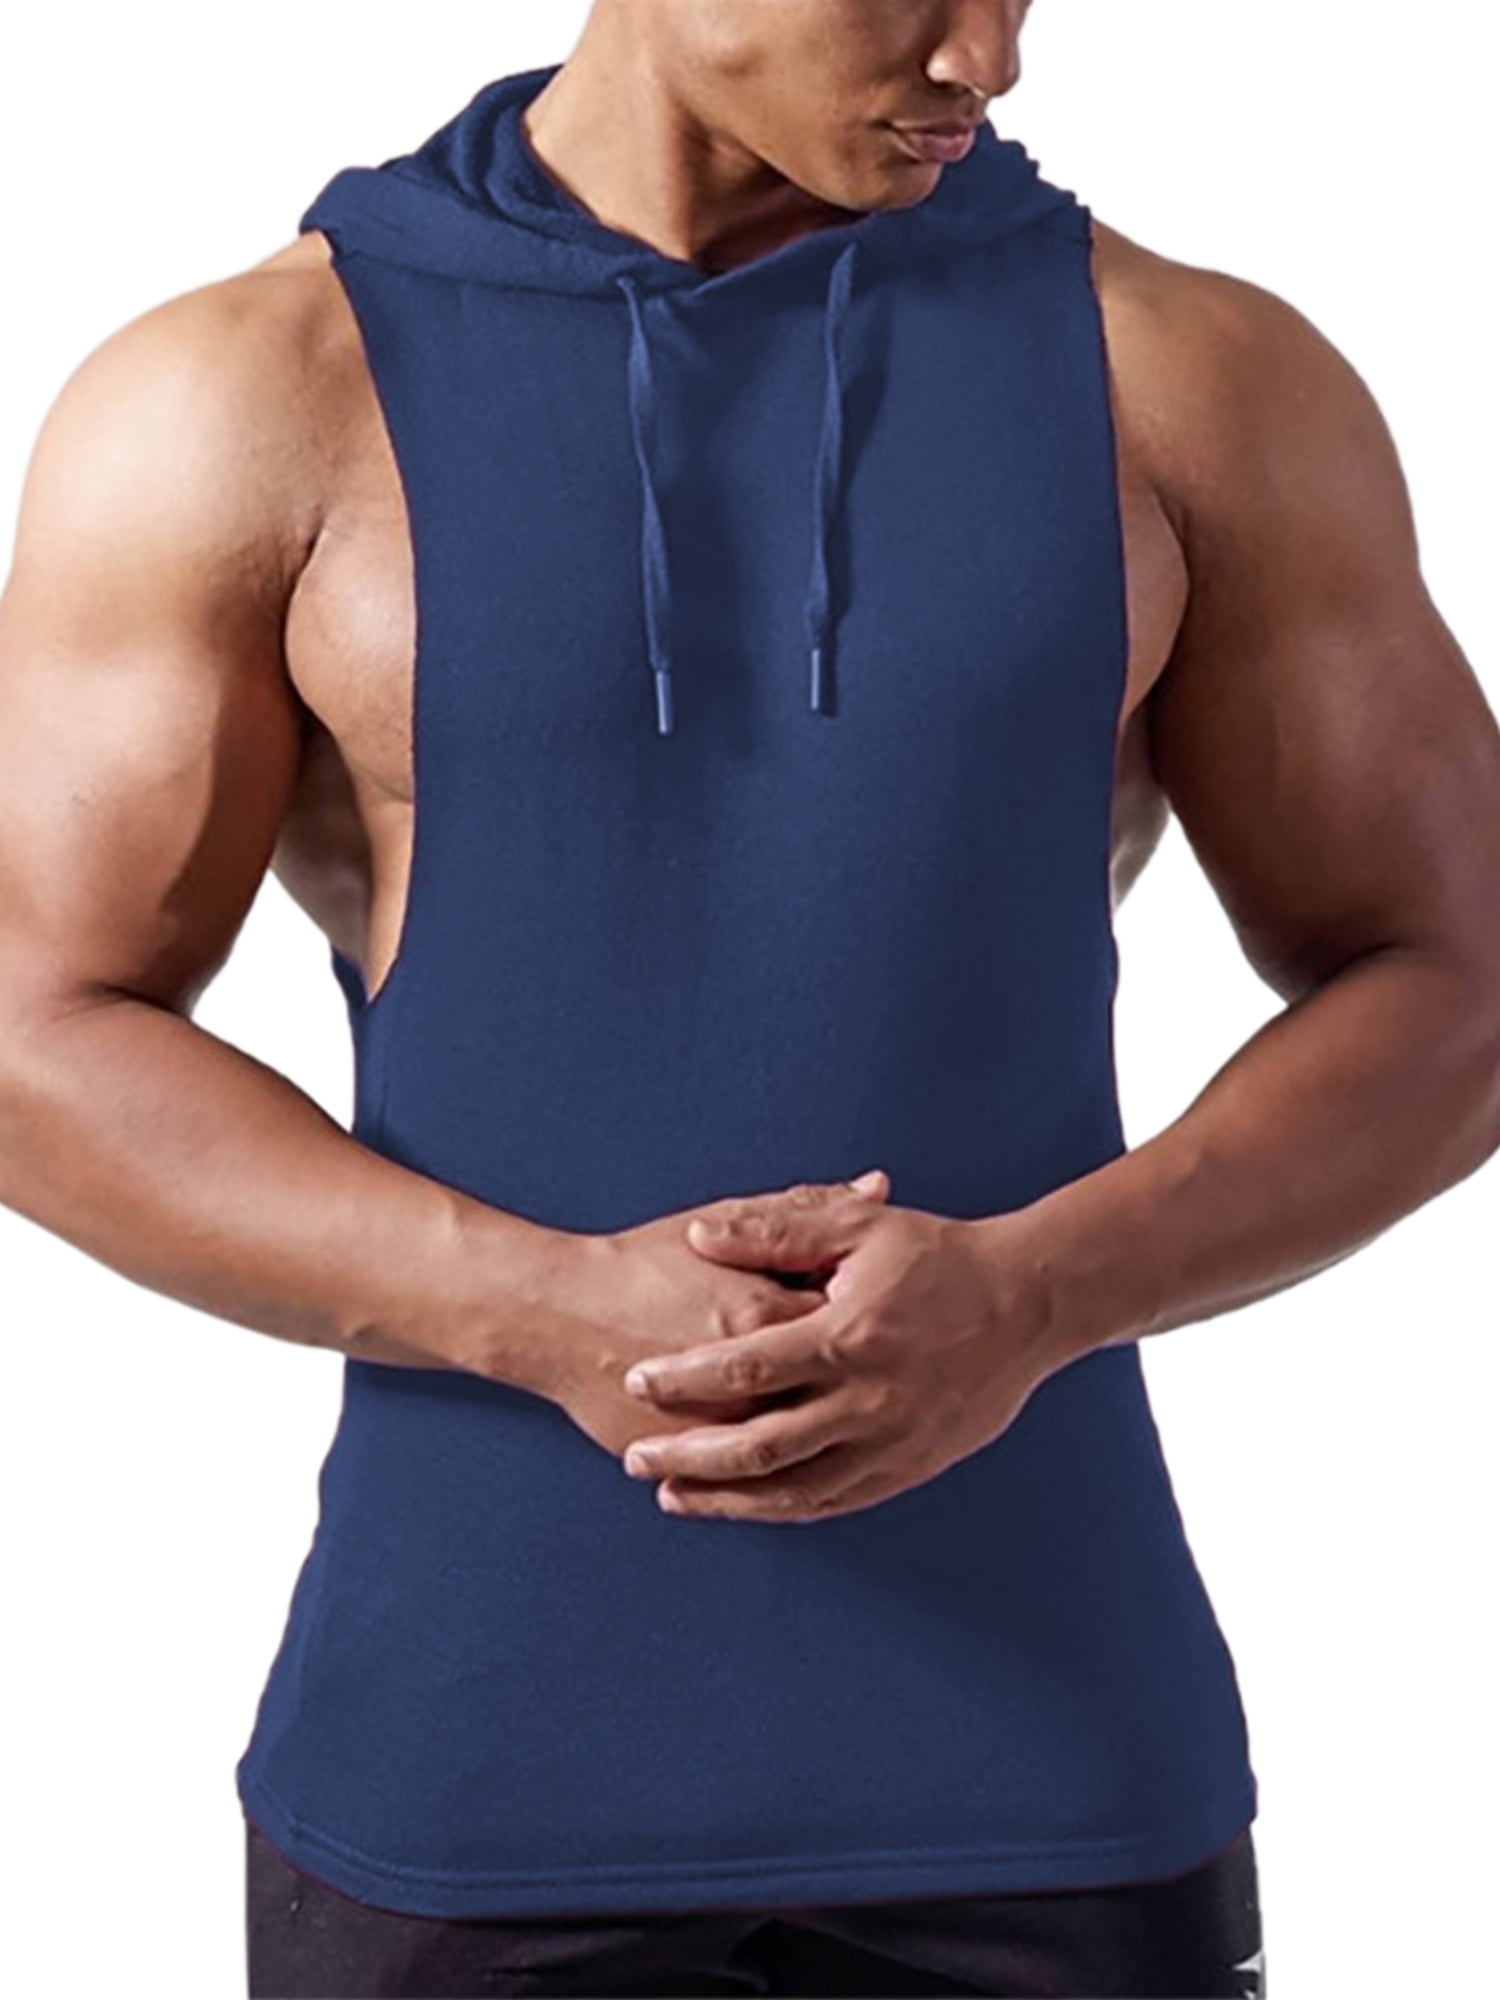 Hipster Men Sleeveless Performance Hoodie Solid Hooded Tanktop Bodybuilding Muscle Skin Tops Fitness Workout Sleeveless Shirt 